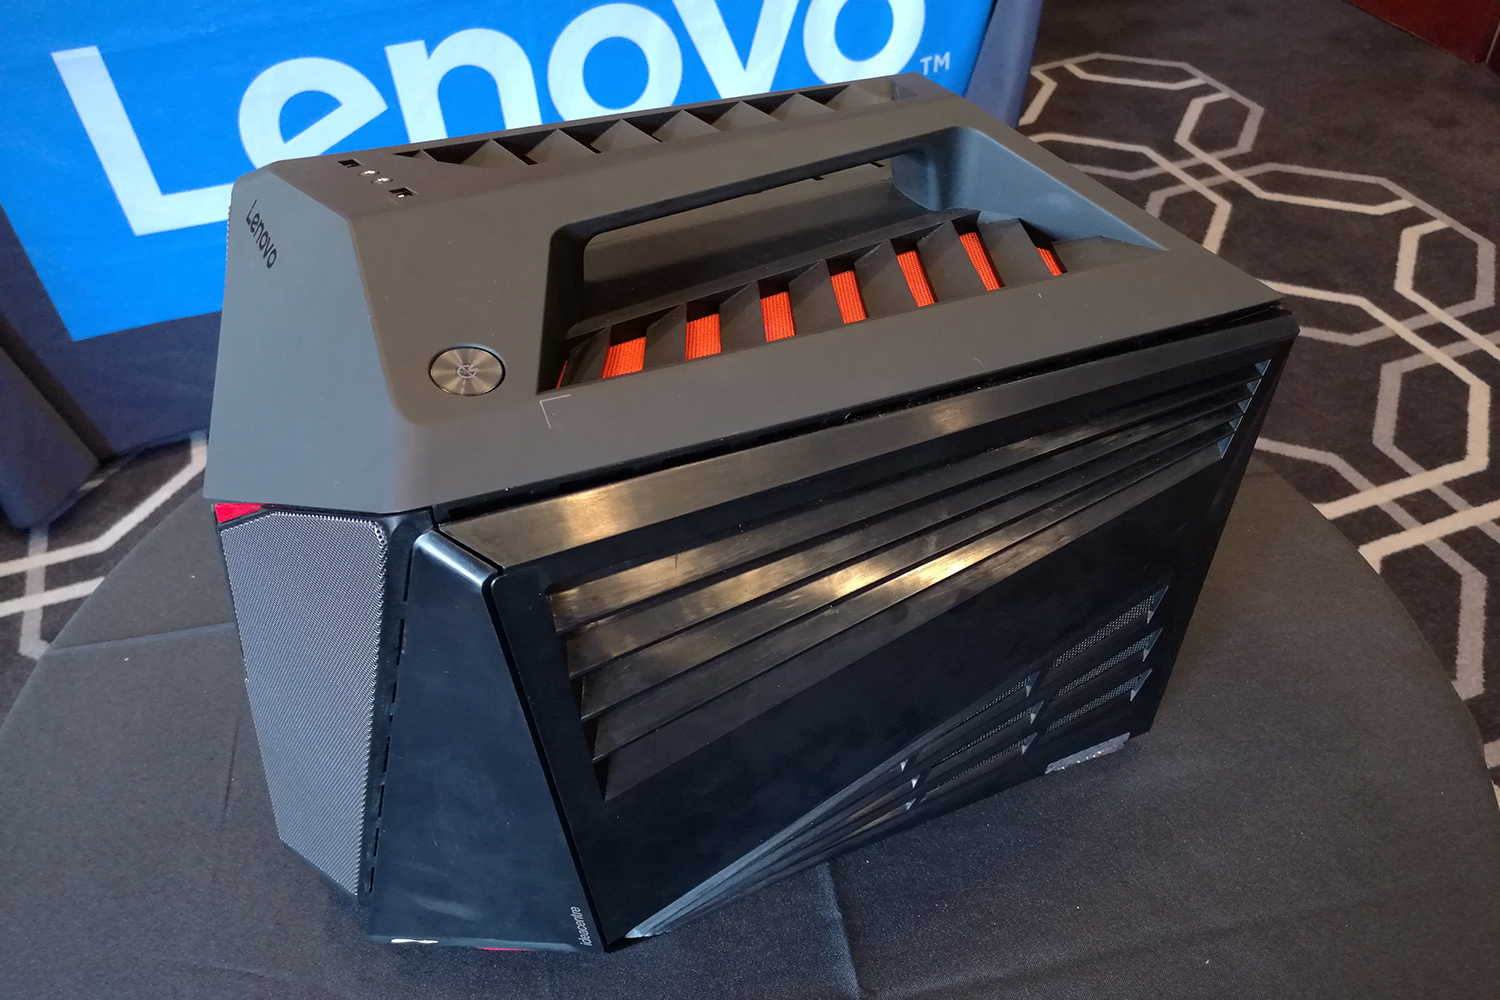 lenovo unveils two portable gaming computers y710 cube y910 all in one dav